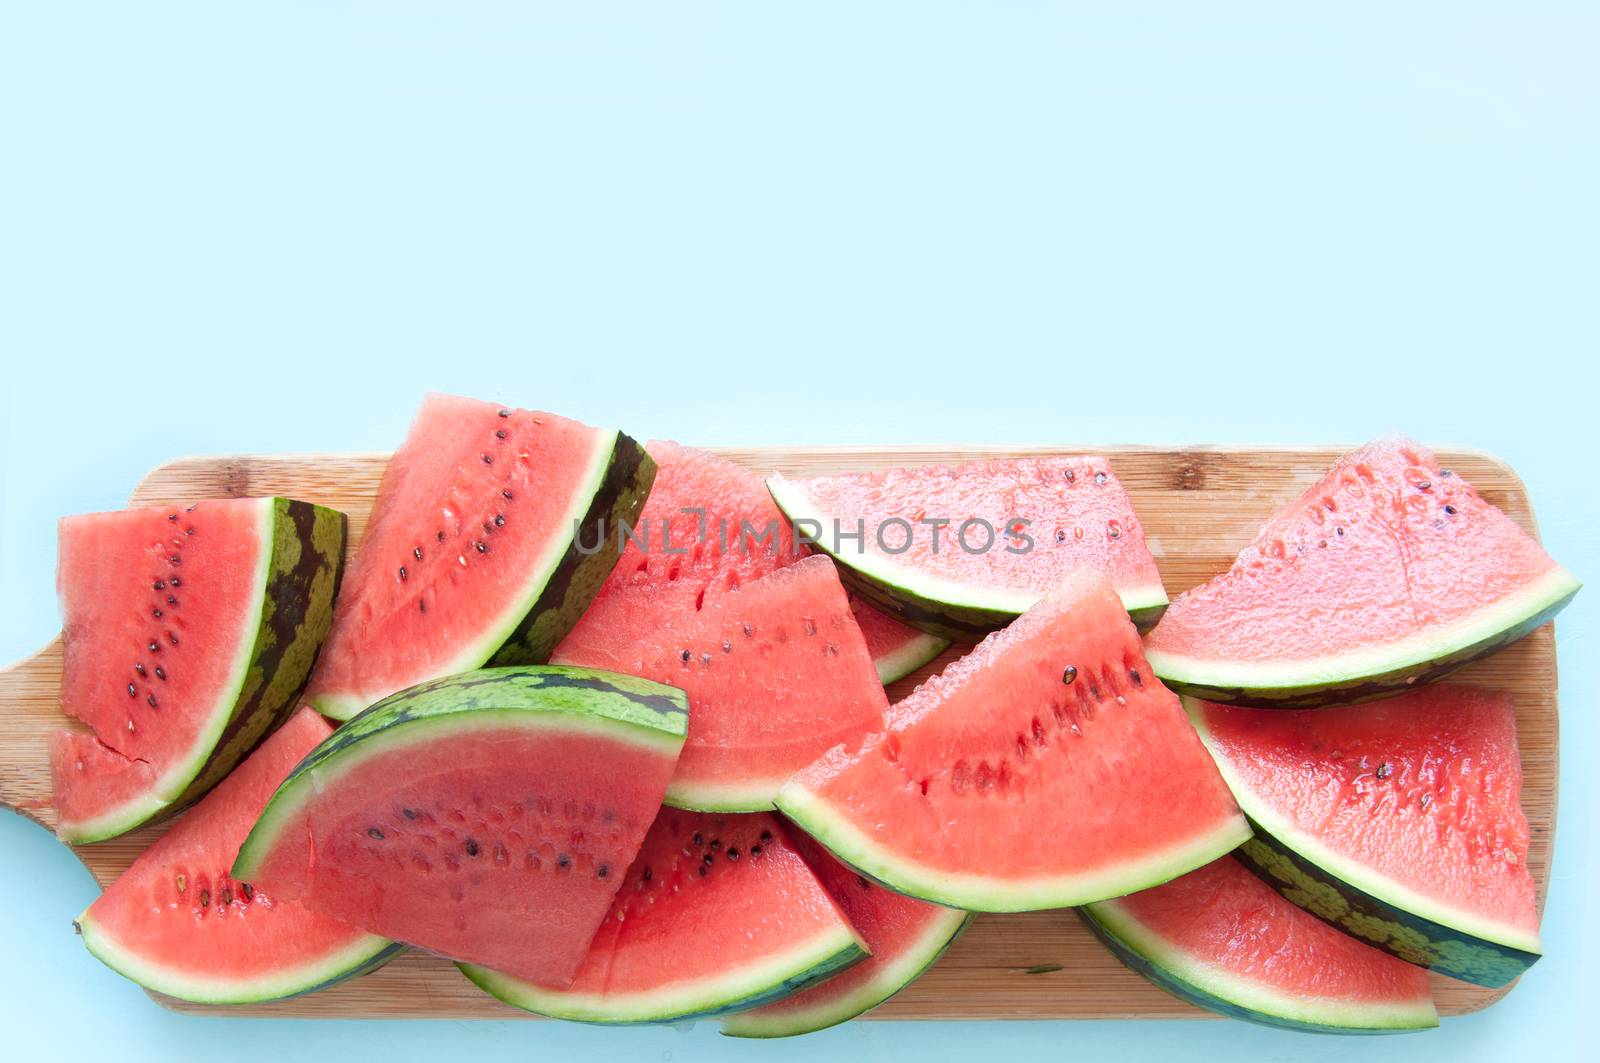 Fresh watermelon slices on chopping board over a blue background